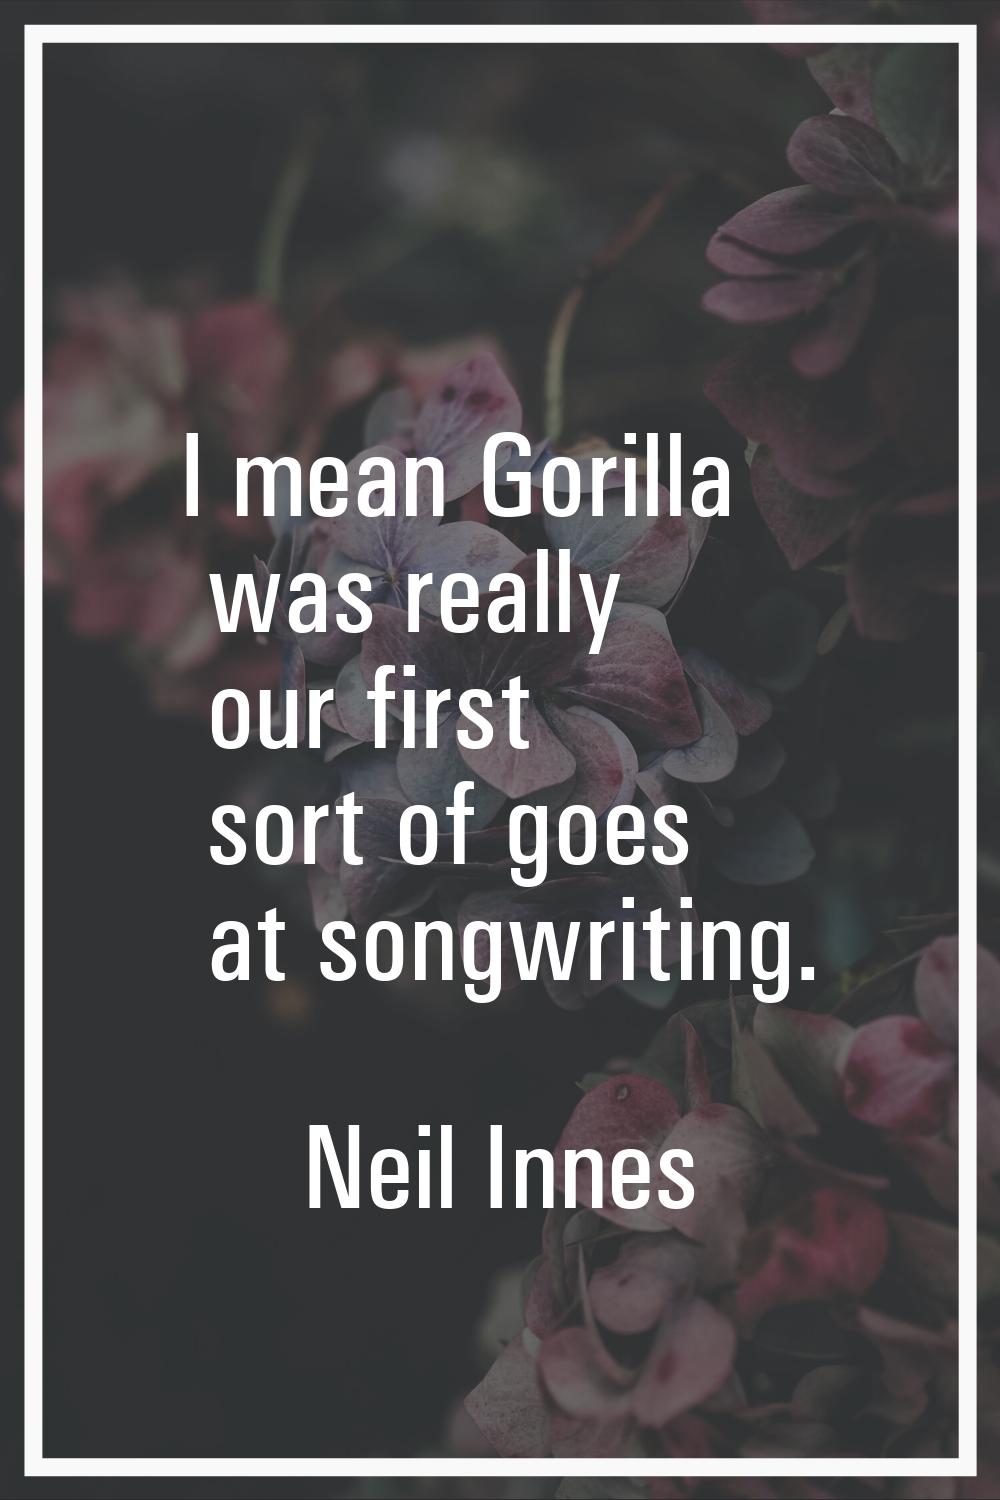 I mean Gorilla was really our first sort of goes at songwriting.